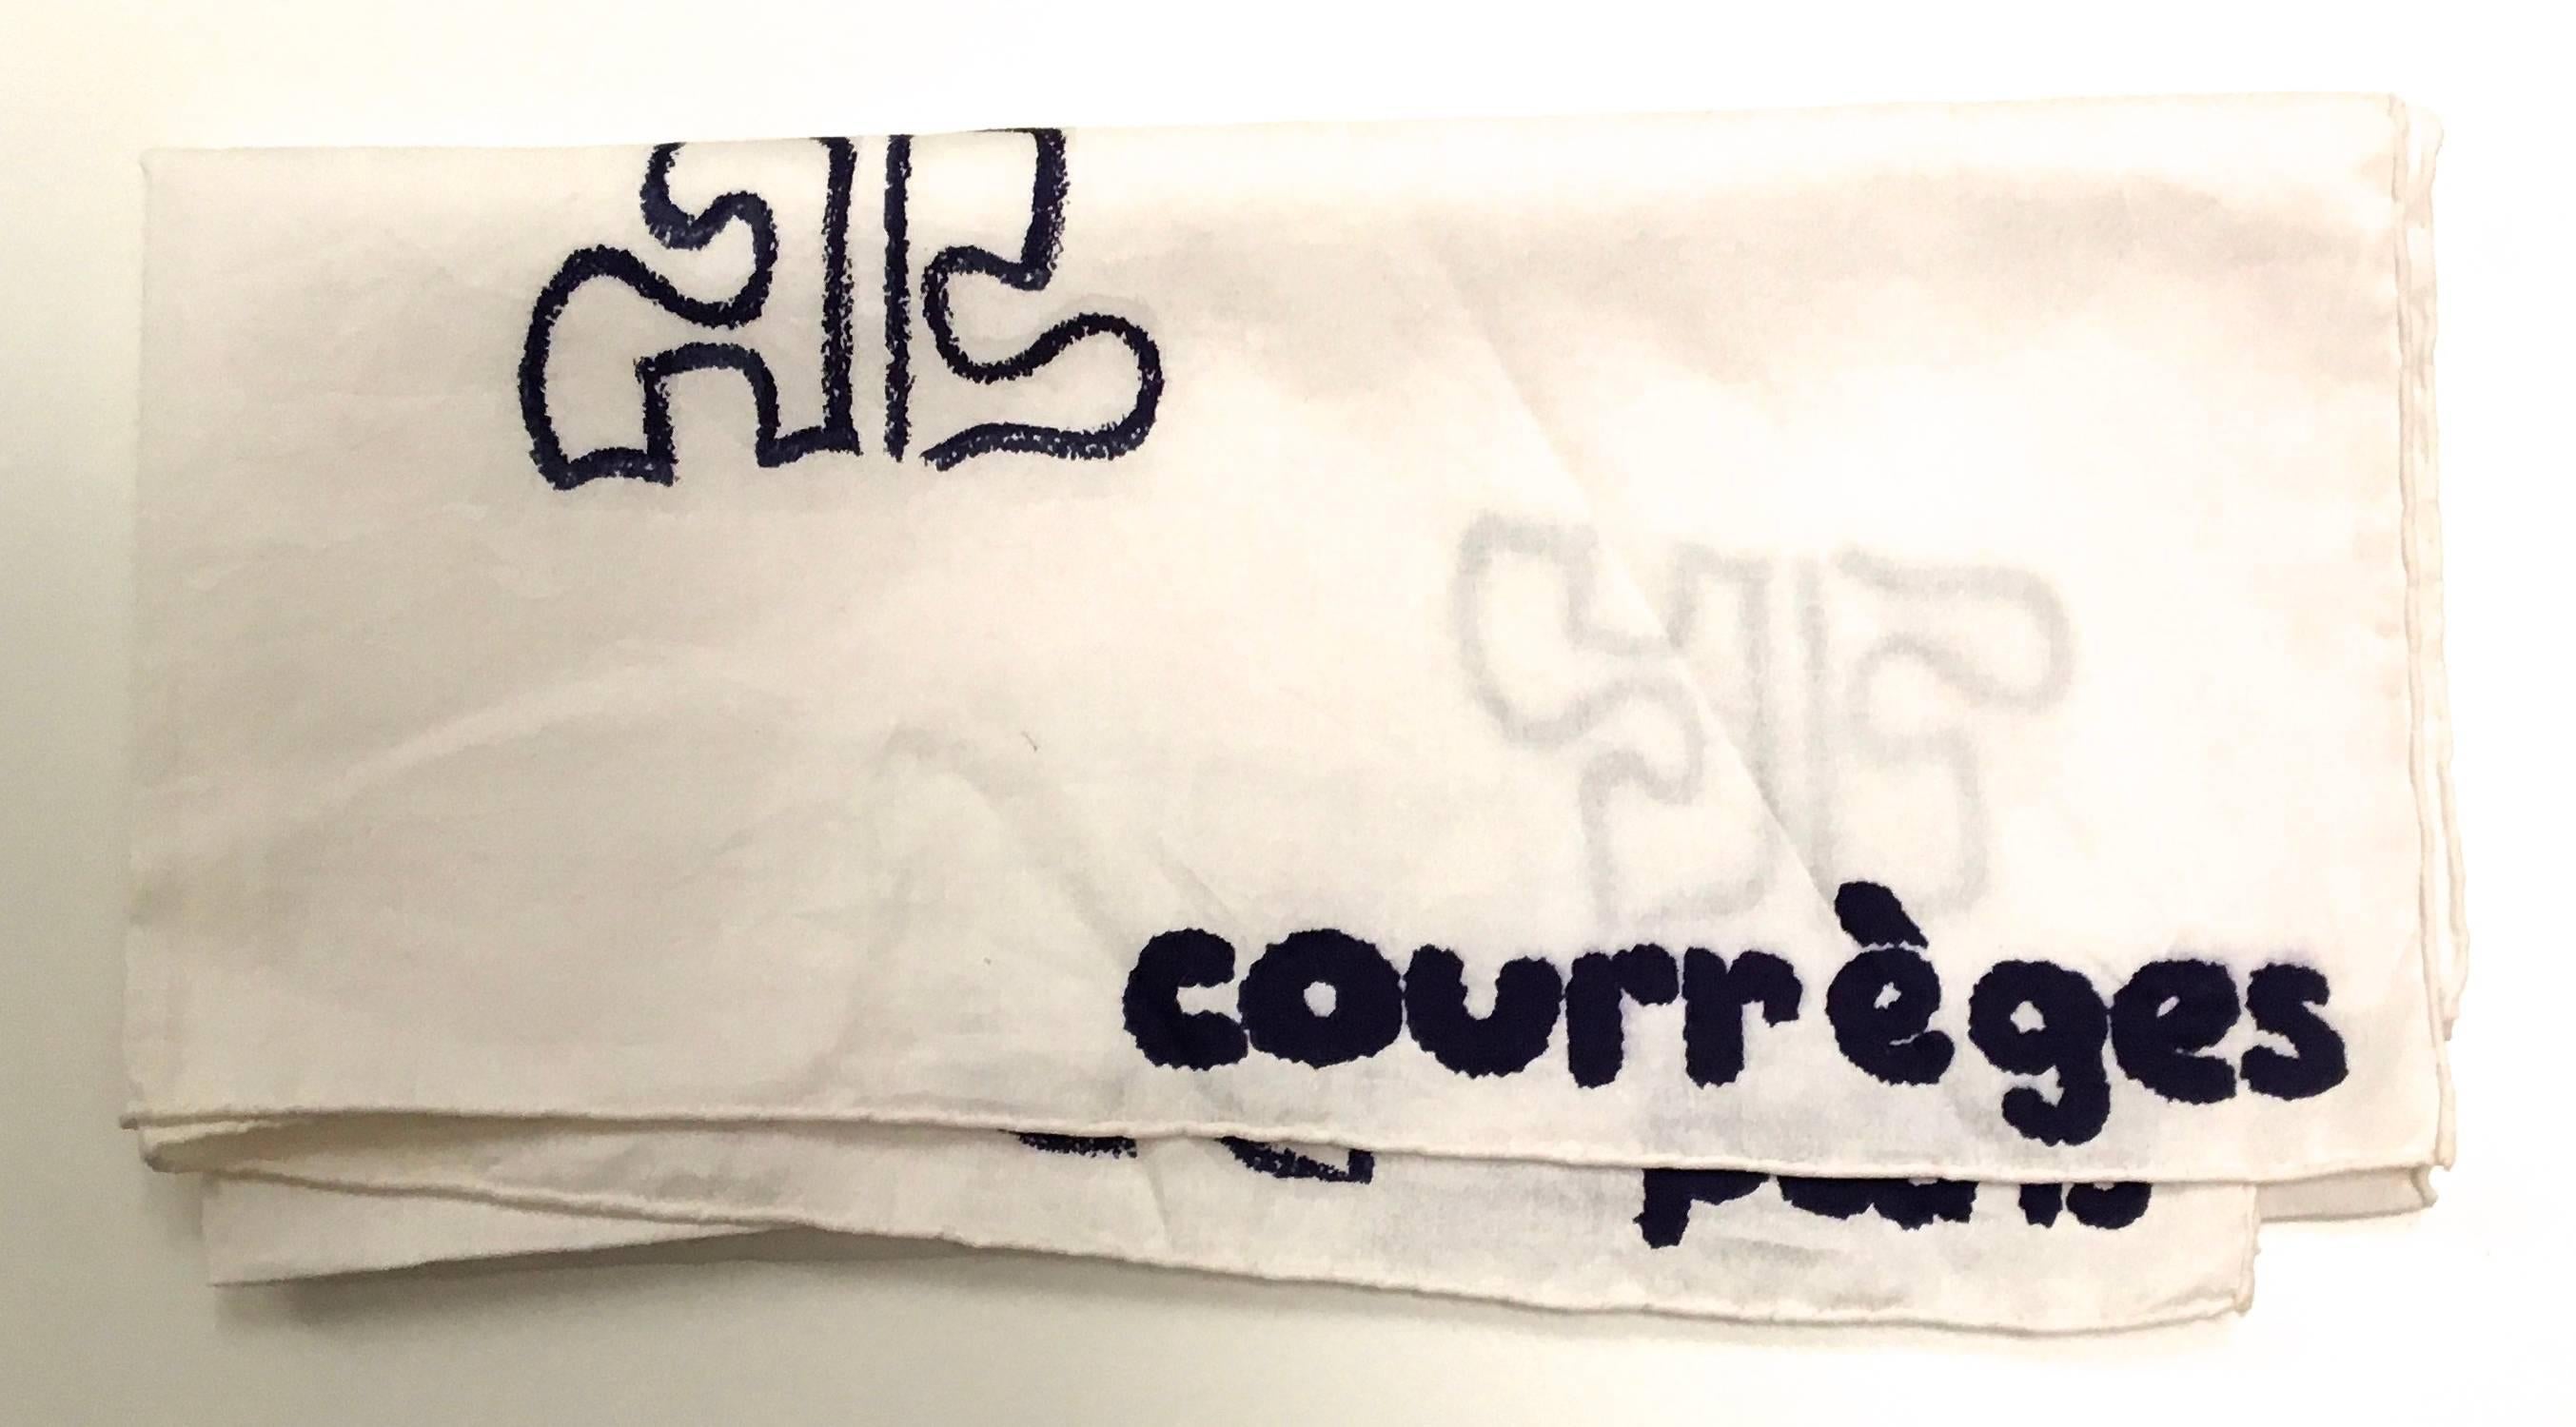 Presented here is a beautiful scarf from Courreges Paris. This rare scarf is made from 100% cotton. The scarf is a solid white background with the Courreges insignia printed throughout the body of the scarf with blue outlining. The scarf is also